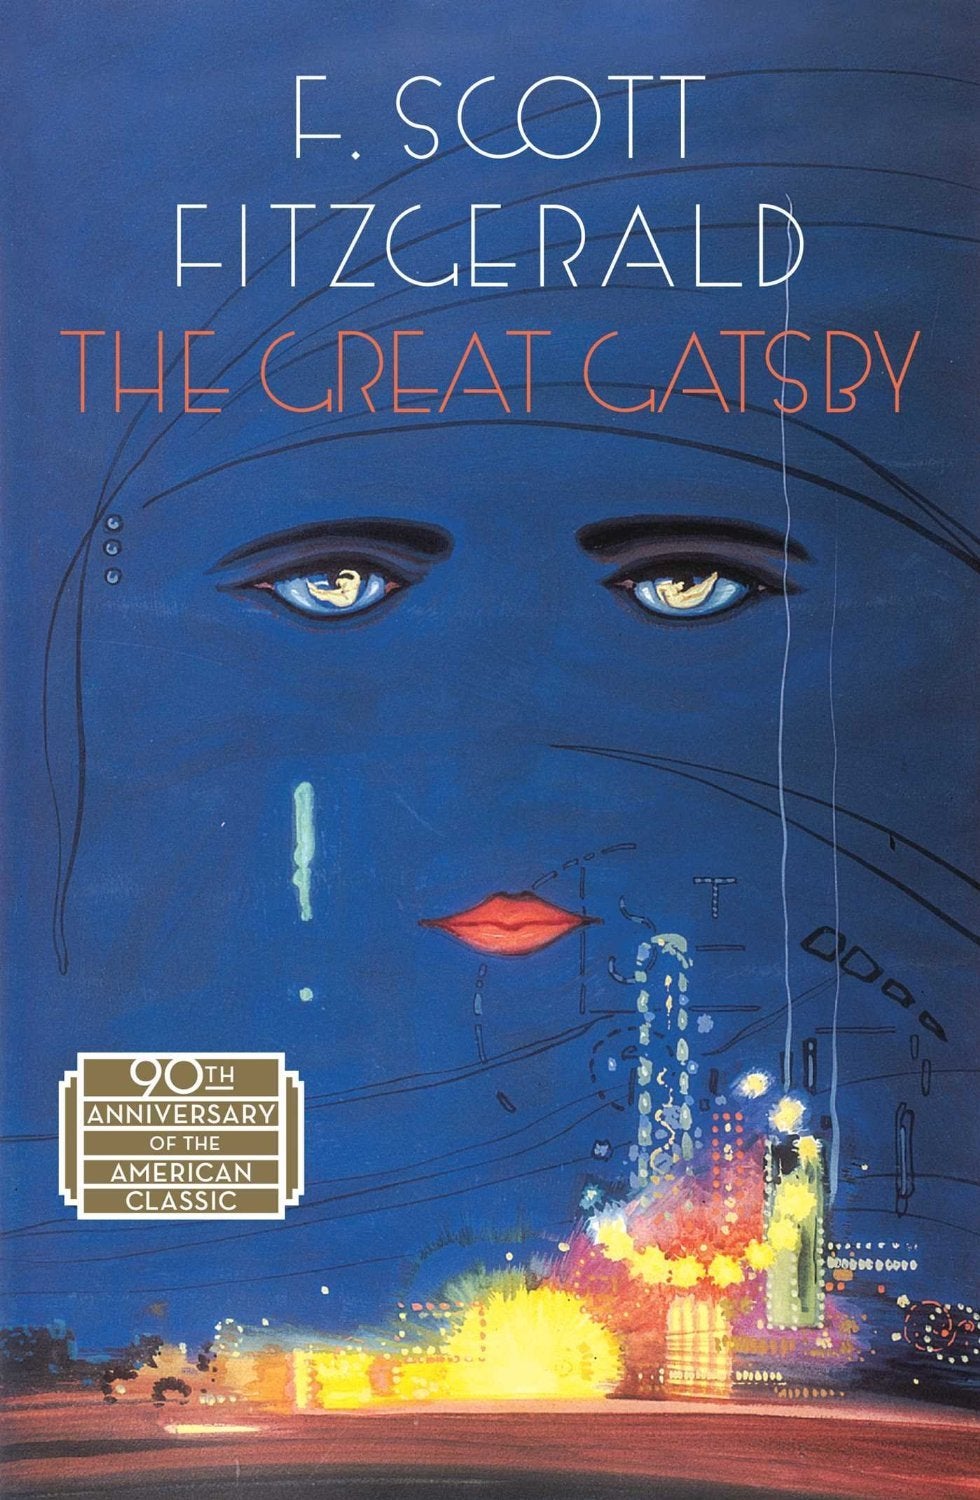 Classics like ‘The Great Gatsby’ get an honourable mention (Am